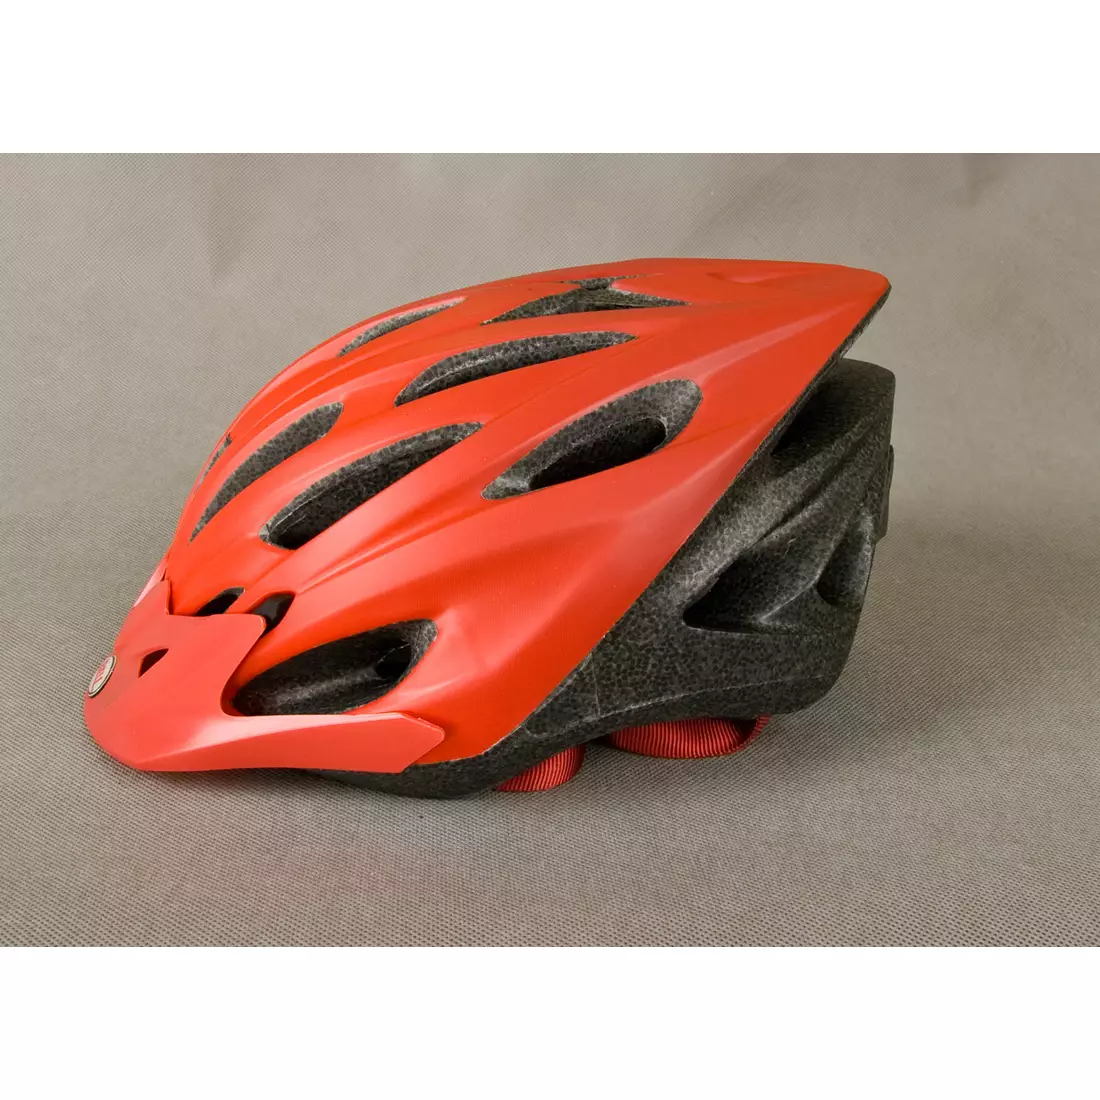 BELL kask rowerowy SOLAR FLARE red